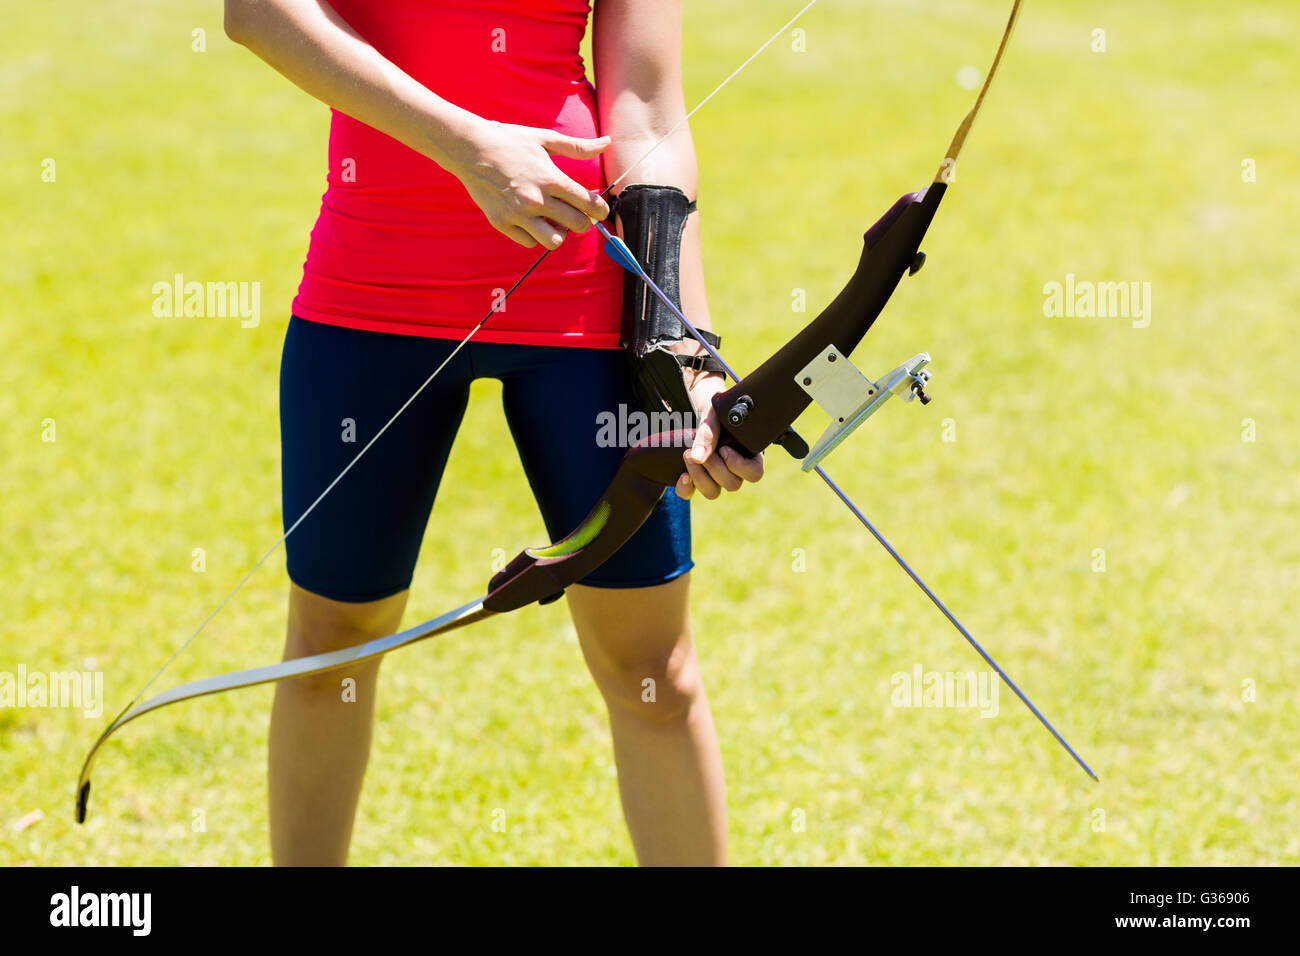 Mid-section of female athlete practicing archery Stock Photo